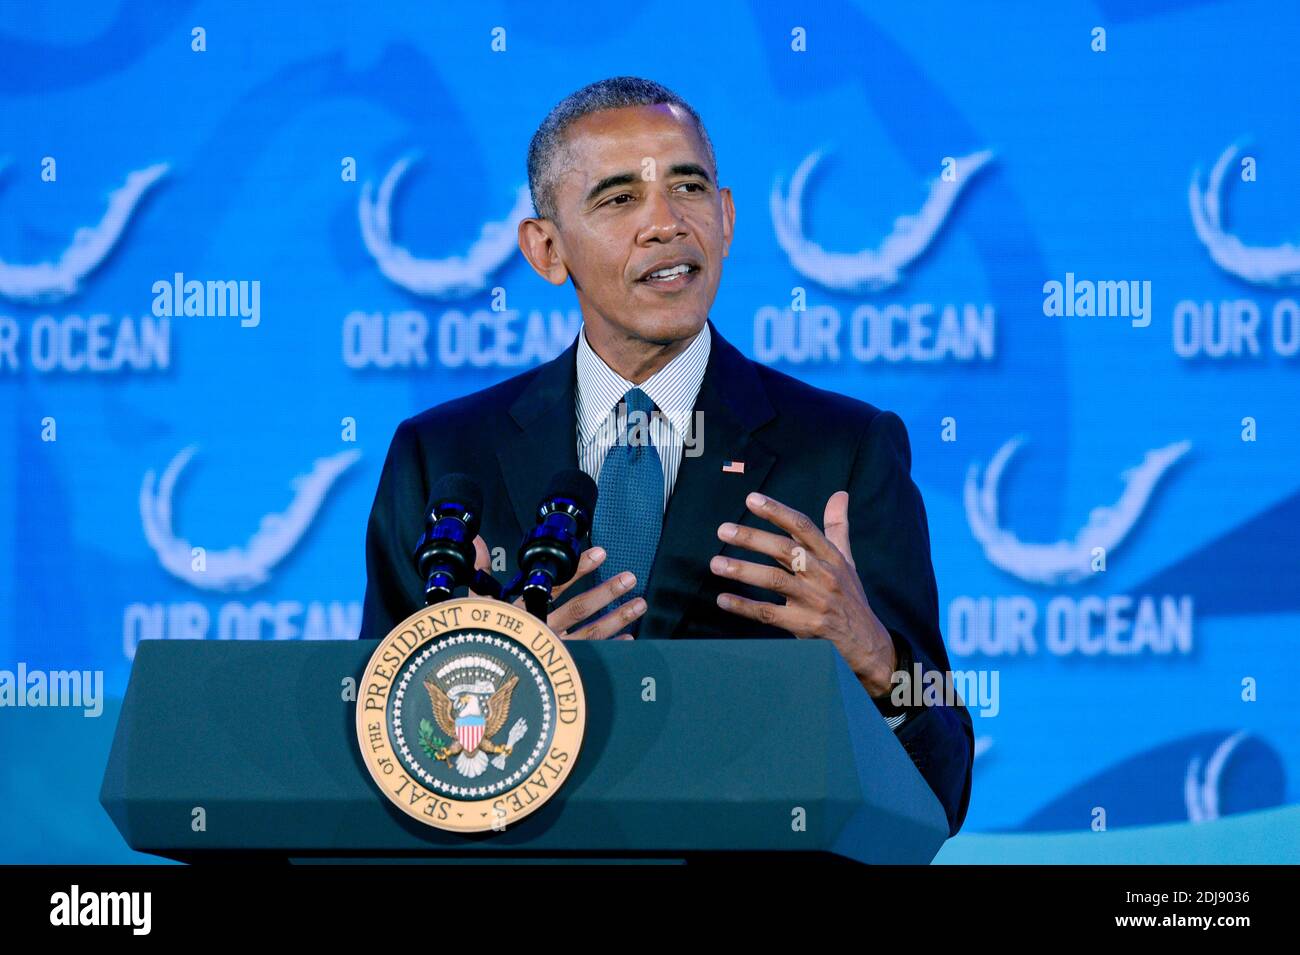 U.S. President Barack Obama speaks at the 2016 Our Ocean Conference at the State Department, September 15 2016, in Washington, DC. Presiden Obama will establish on Thursday the first national marine monument in the Atlantic, a move that's designed to permanently protect nearly 5,000 square miles of underwater canyons and mountains off the coast of New England.Photo by Olivier Douliery/ABACAPRESS.COM Stock Photo